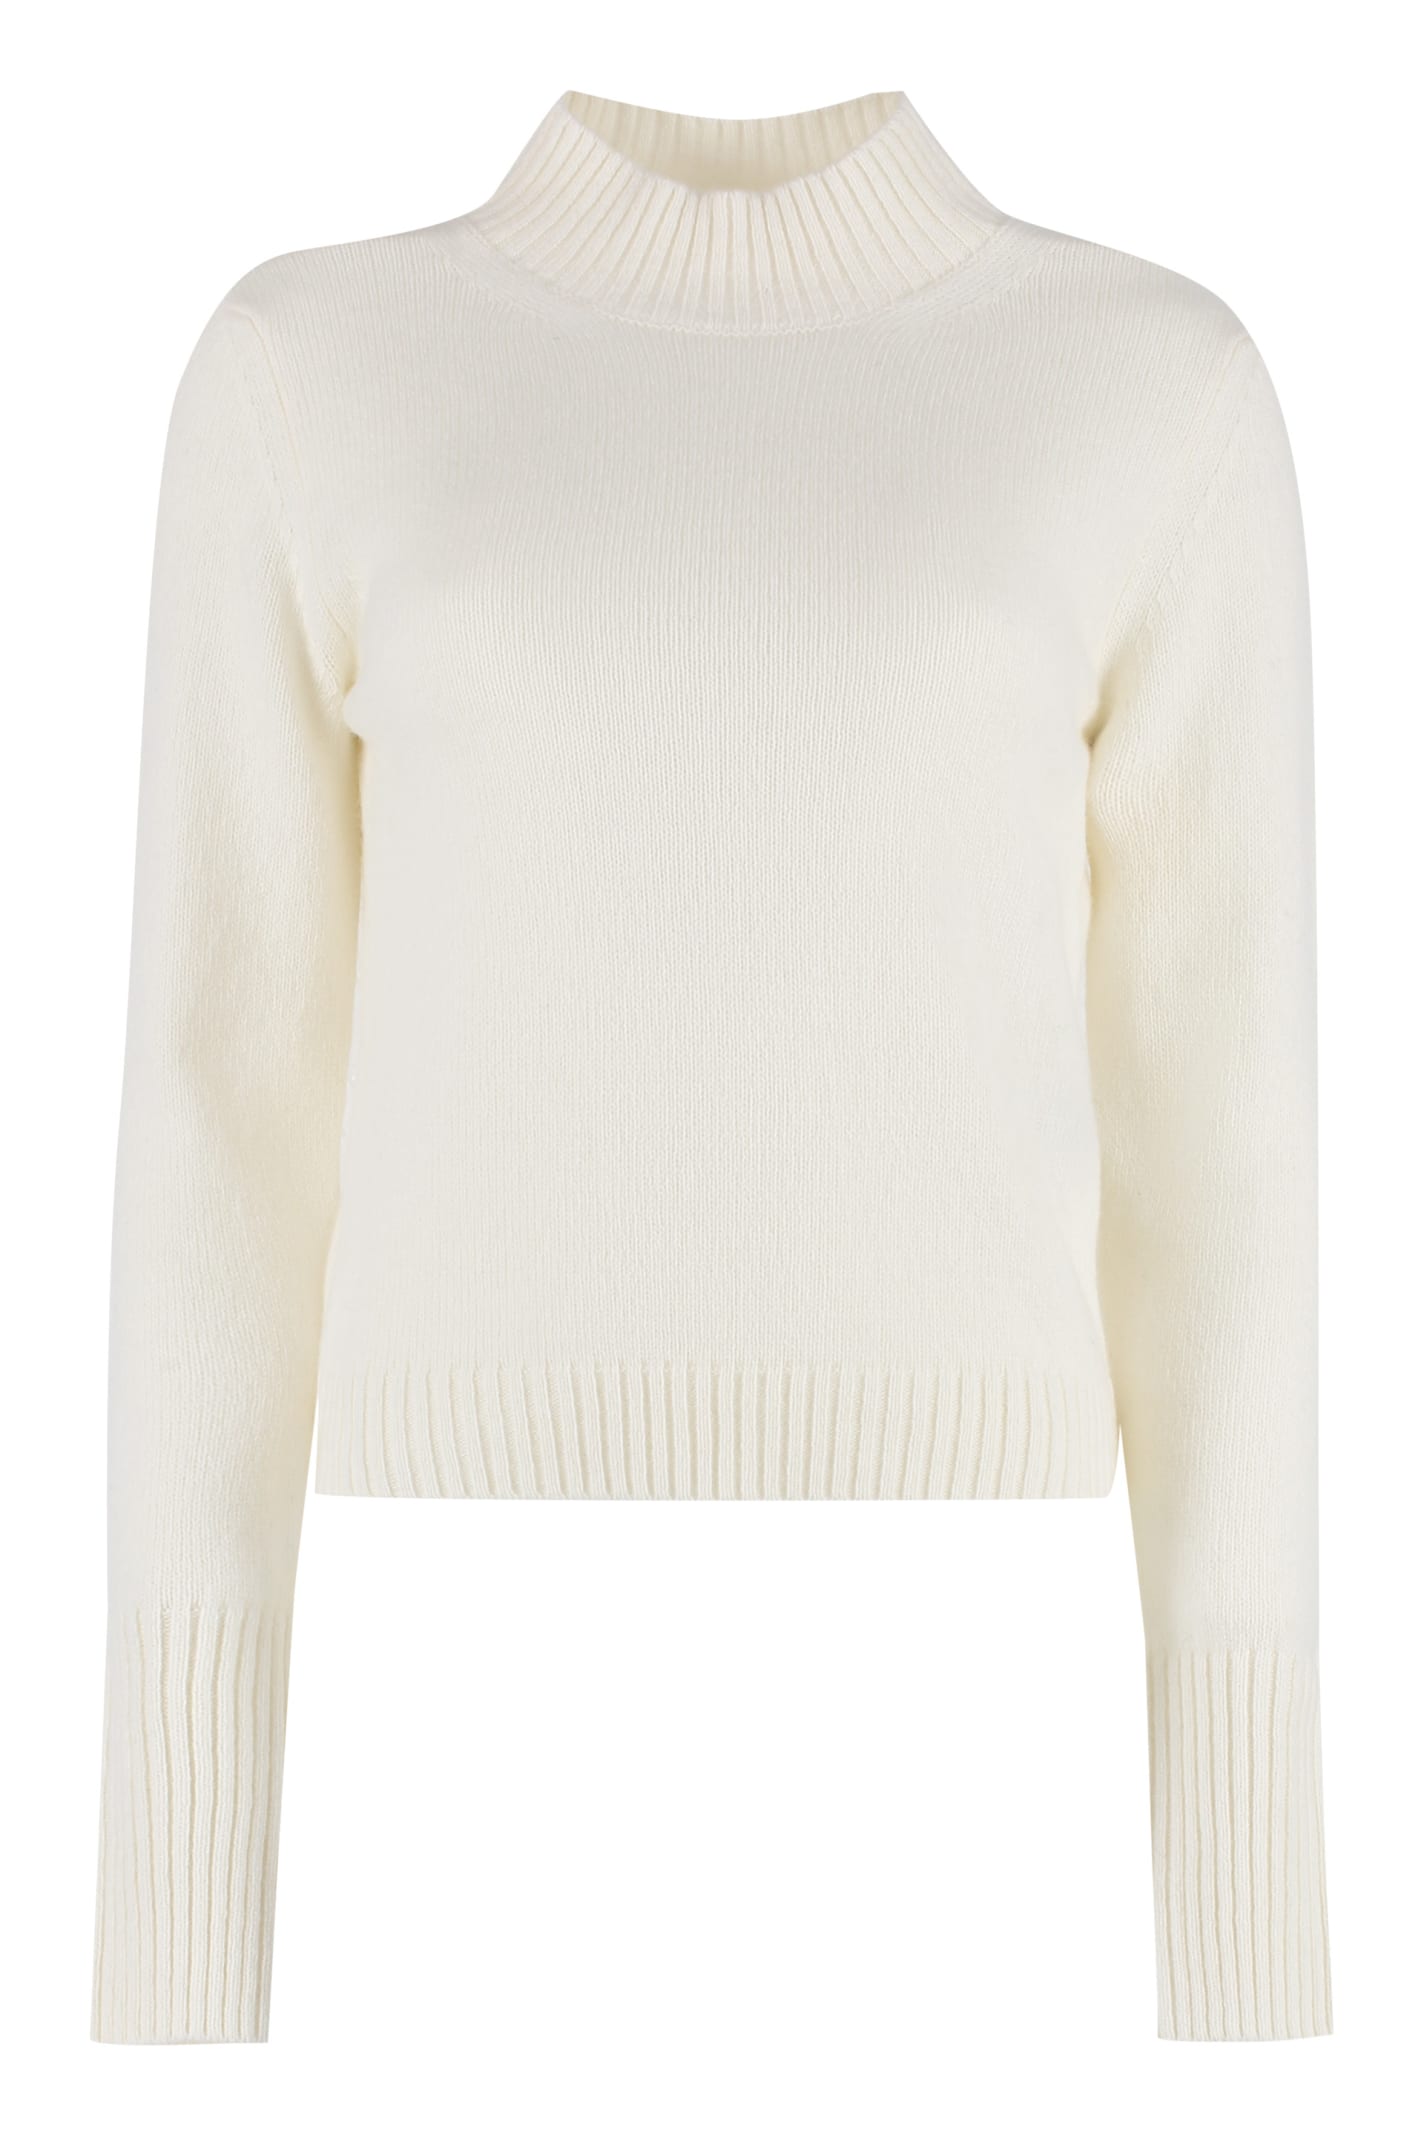 Federica Tosi Wool And Cashmere Sweater